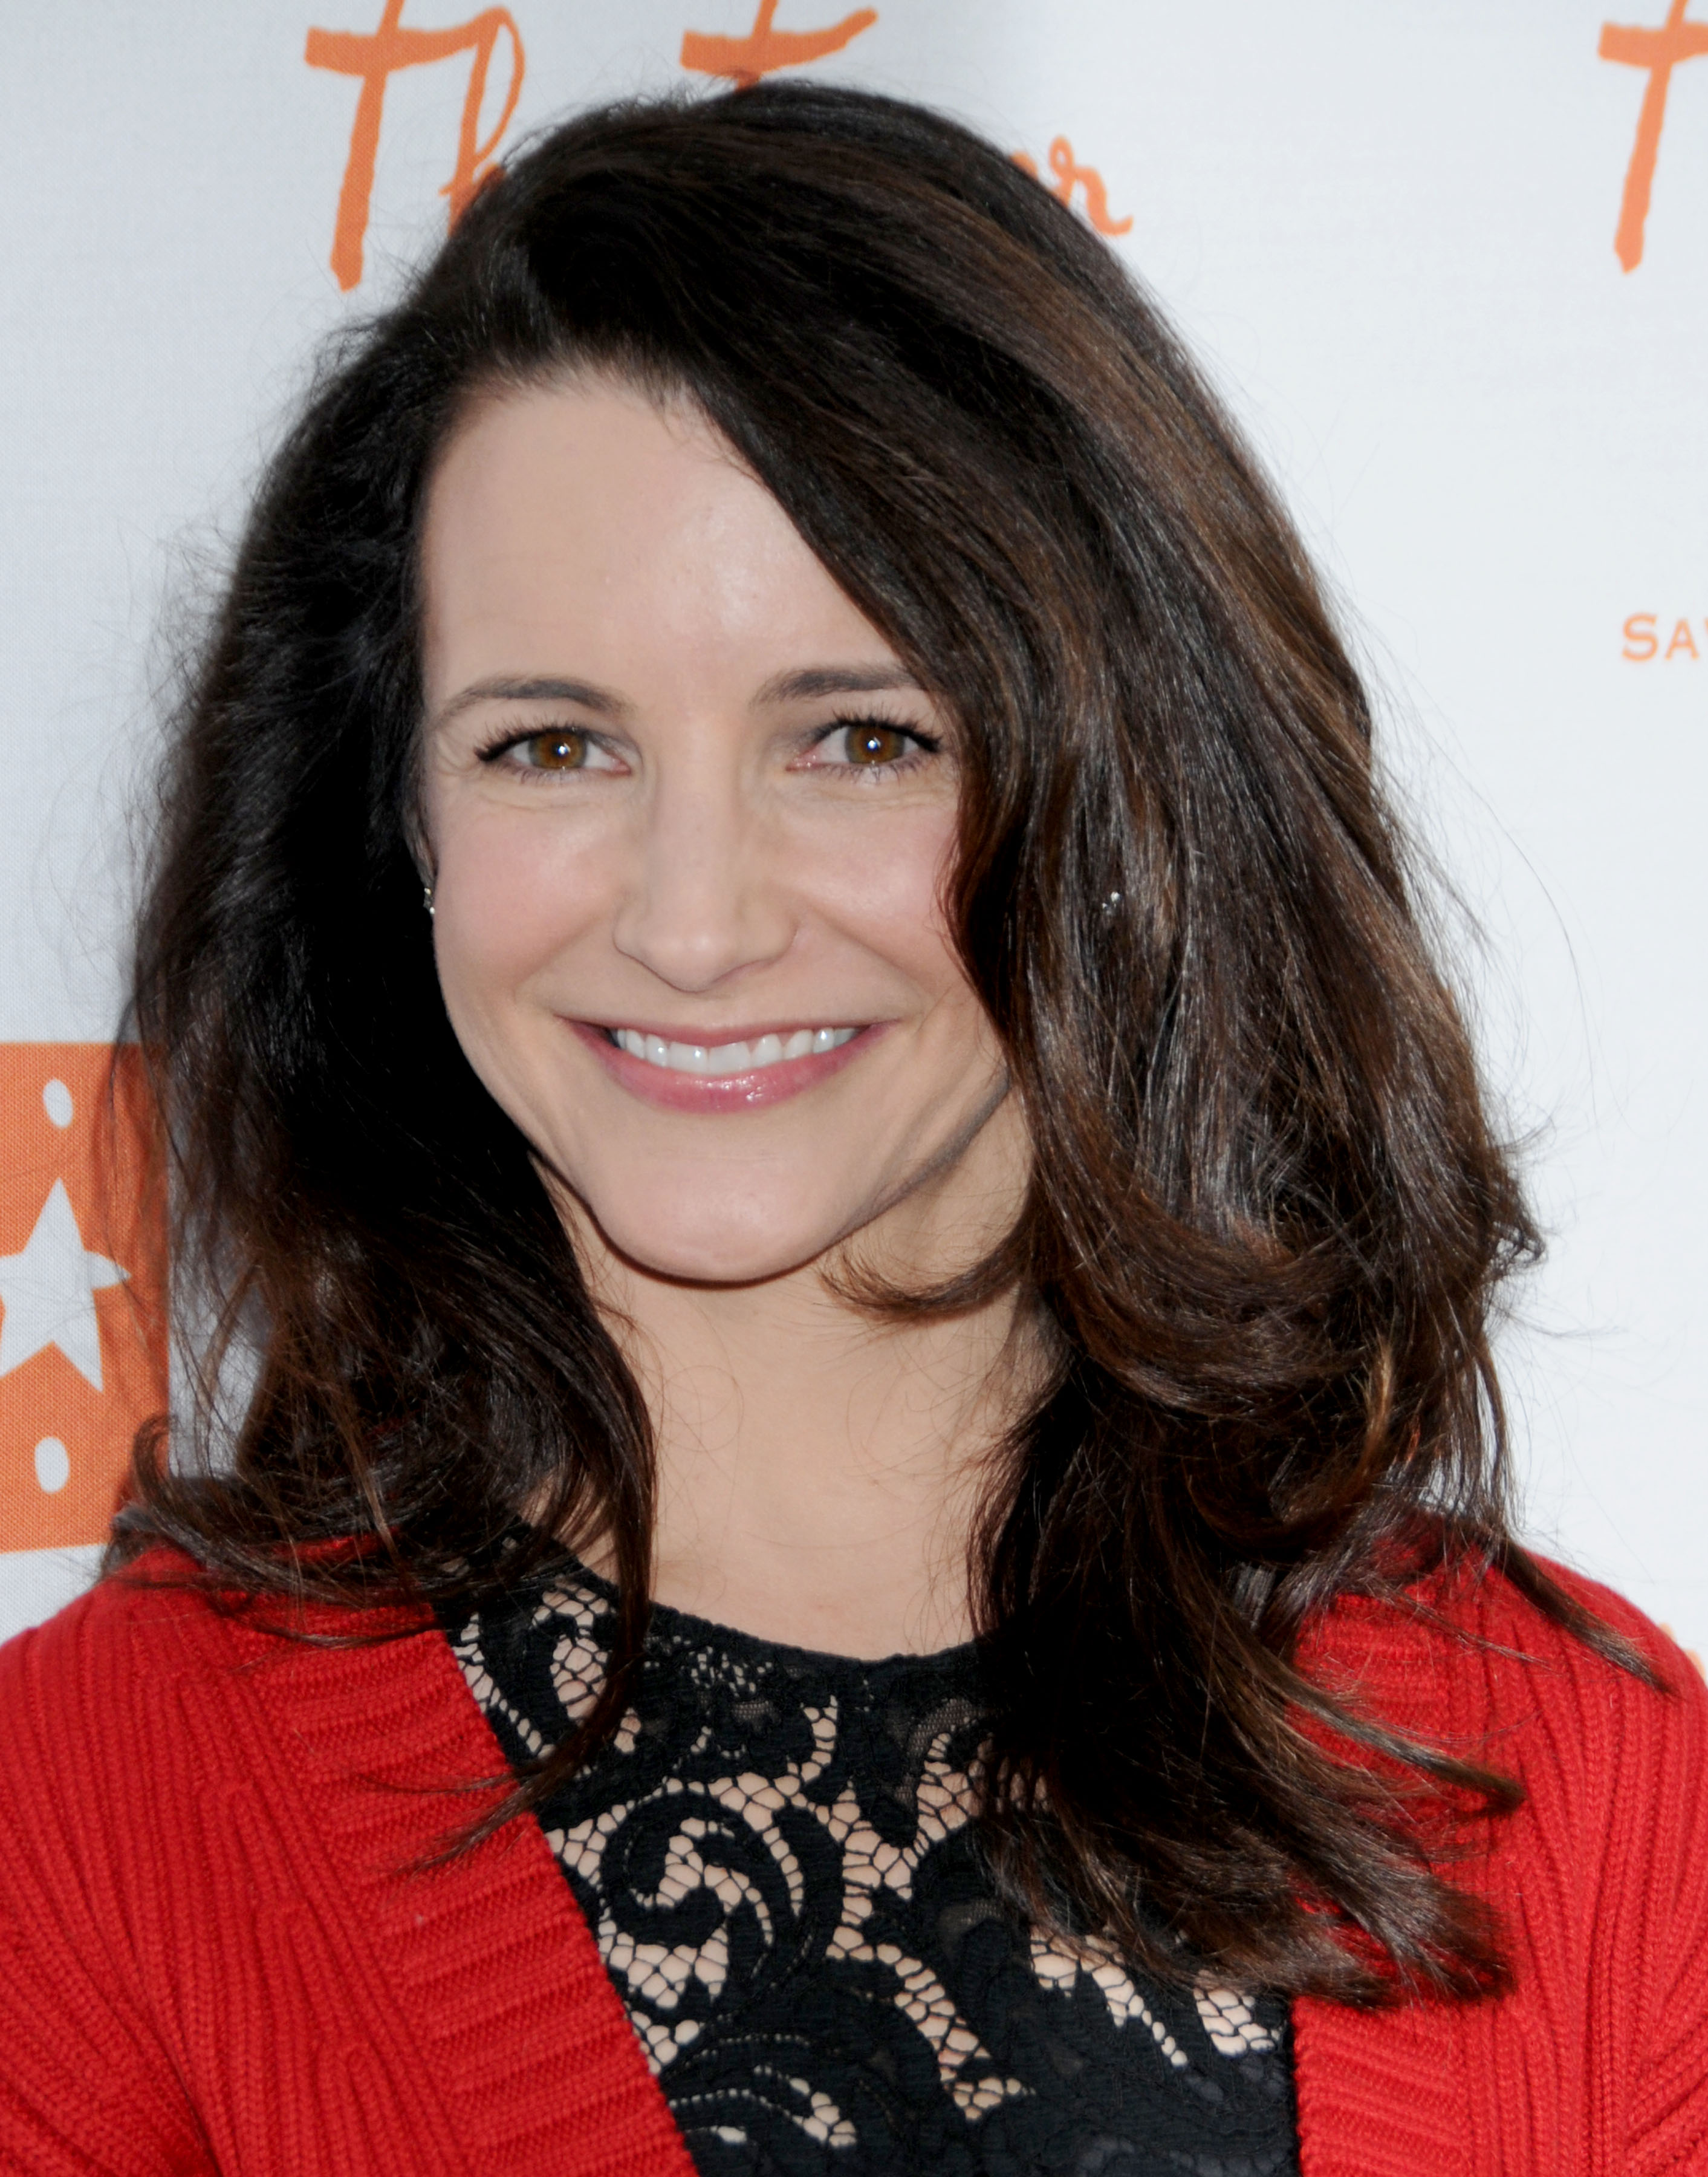 Kristin Davis arrives at "Trevor Live", the annual show at The Hollywood Palladium on December 5, 2010 in Hollywood, California. | Source: Getty Images